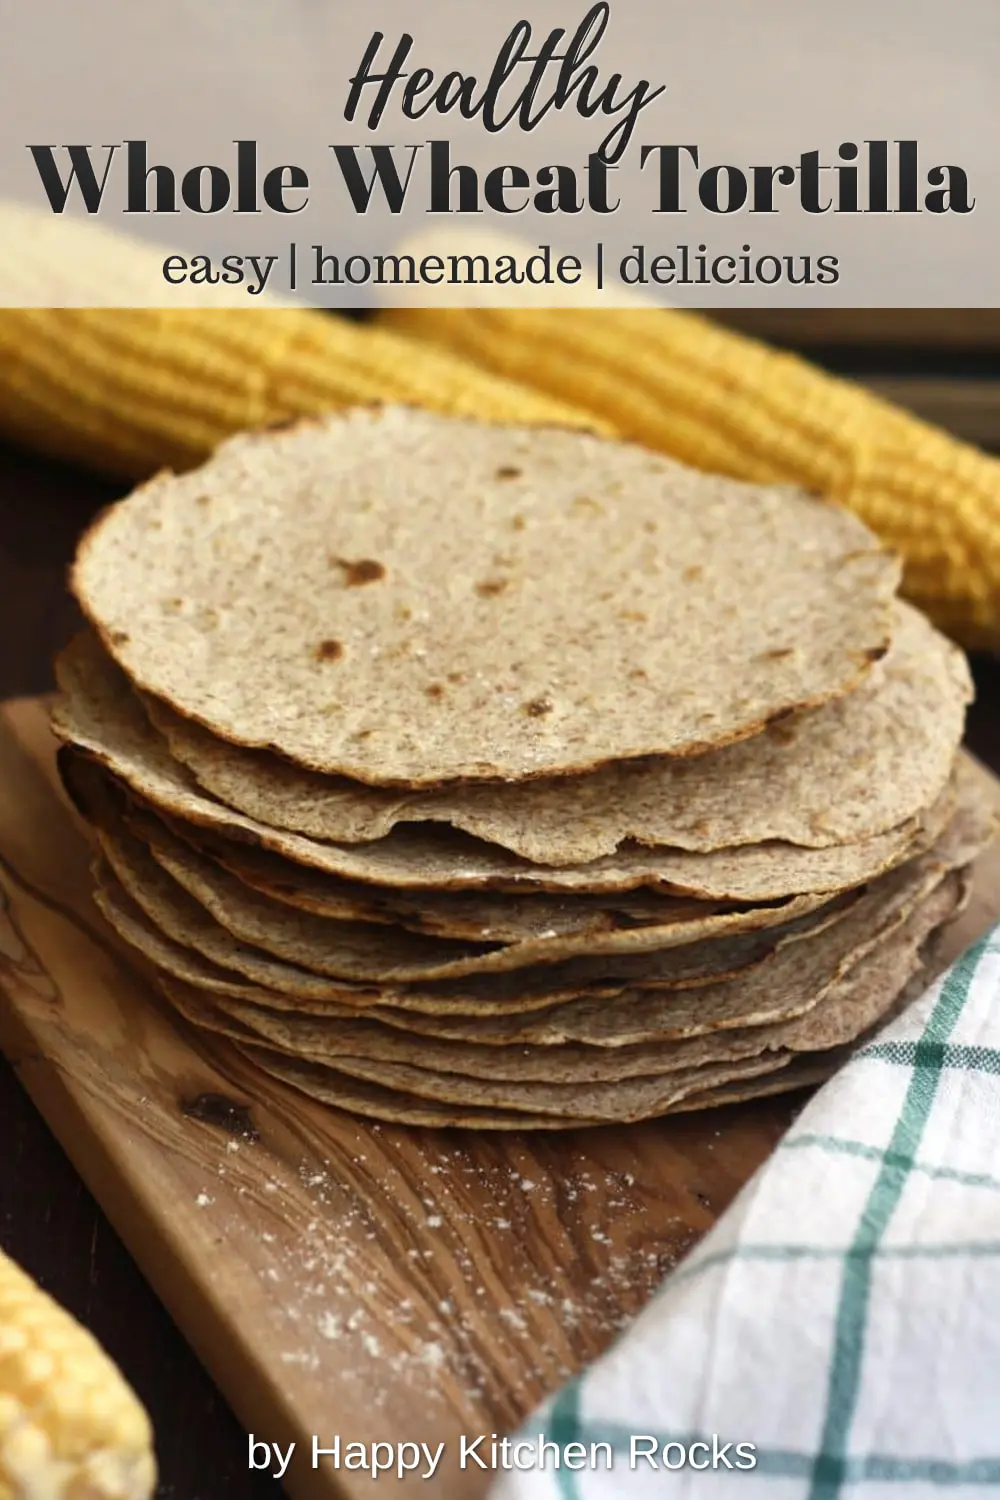 Homemade Whole Wheat Tortilla Closeup Collage with Text Overlay